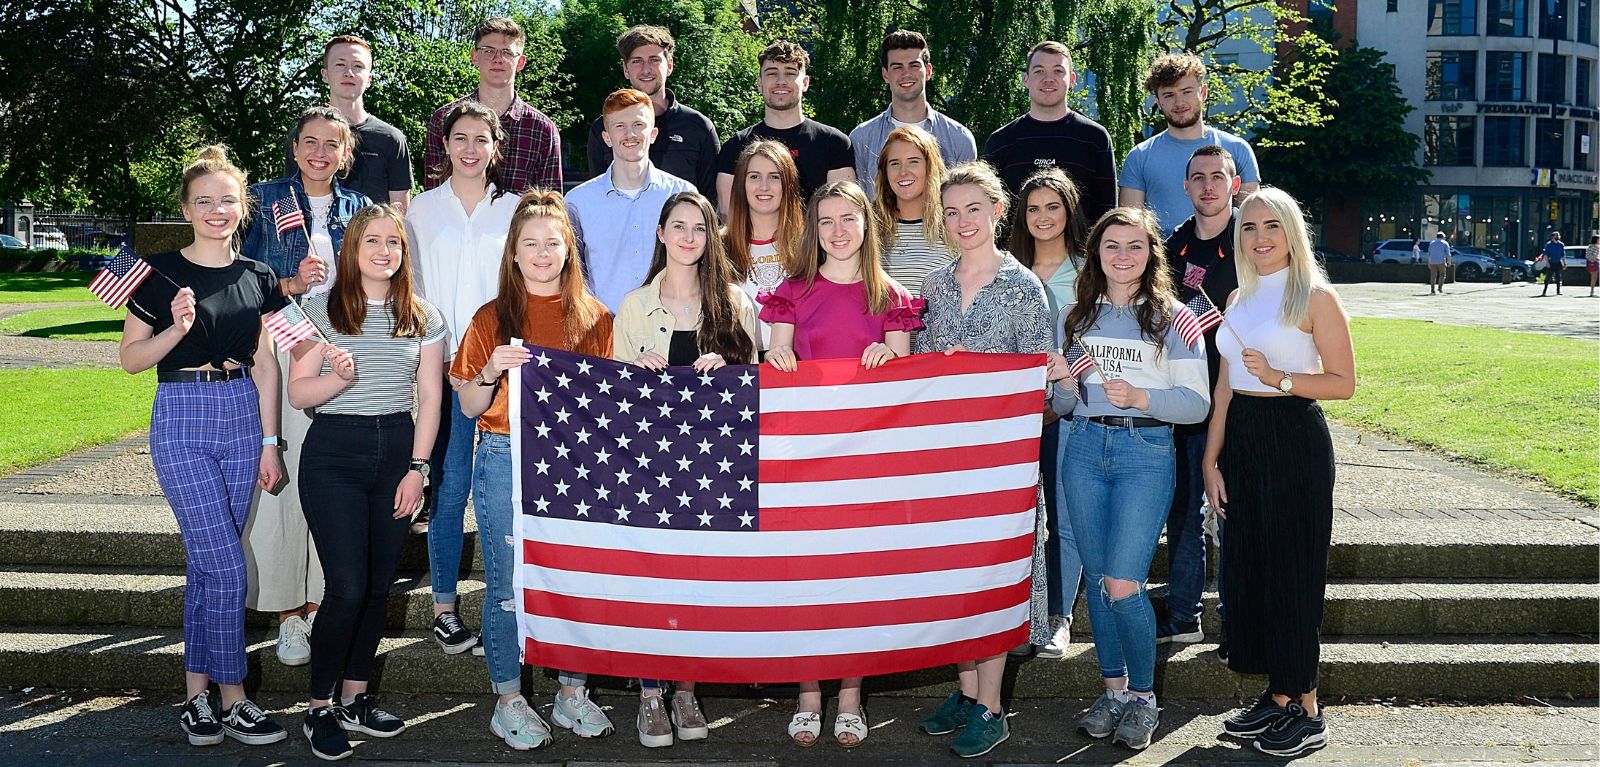 Students holding an American flag